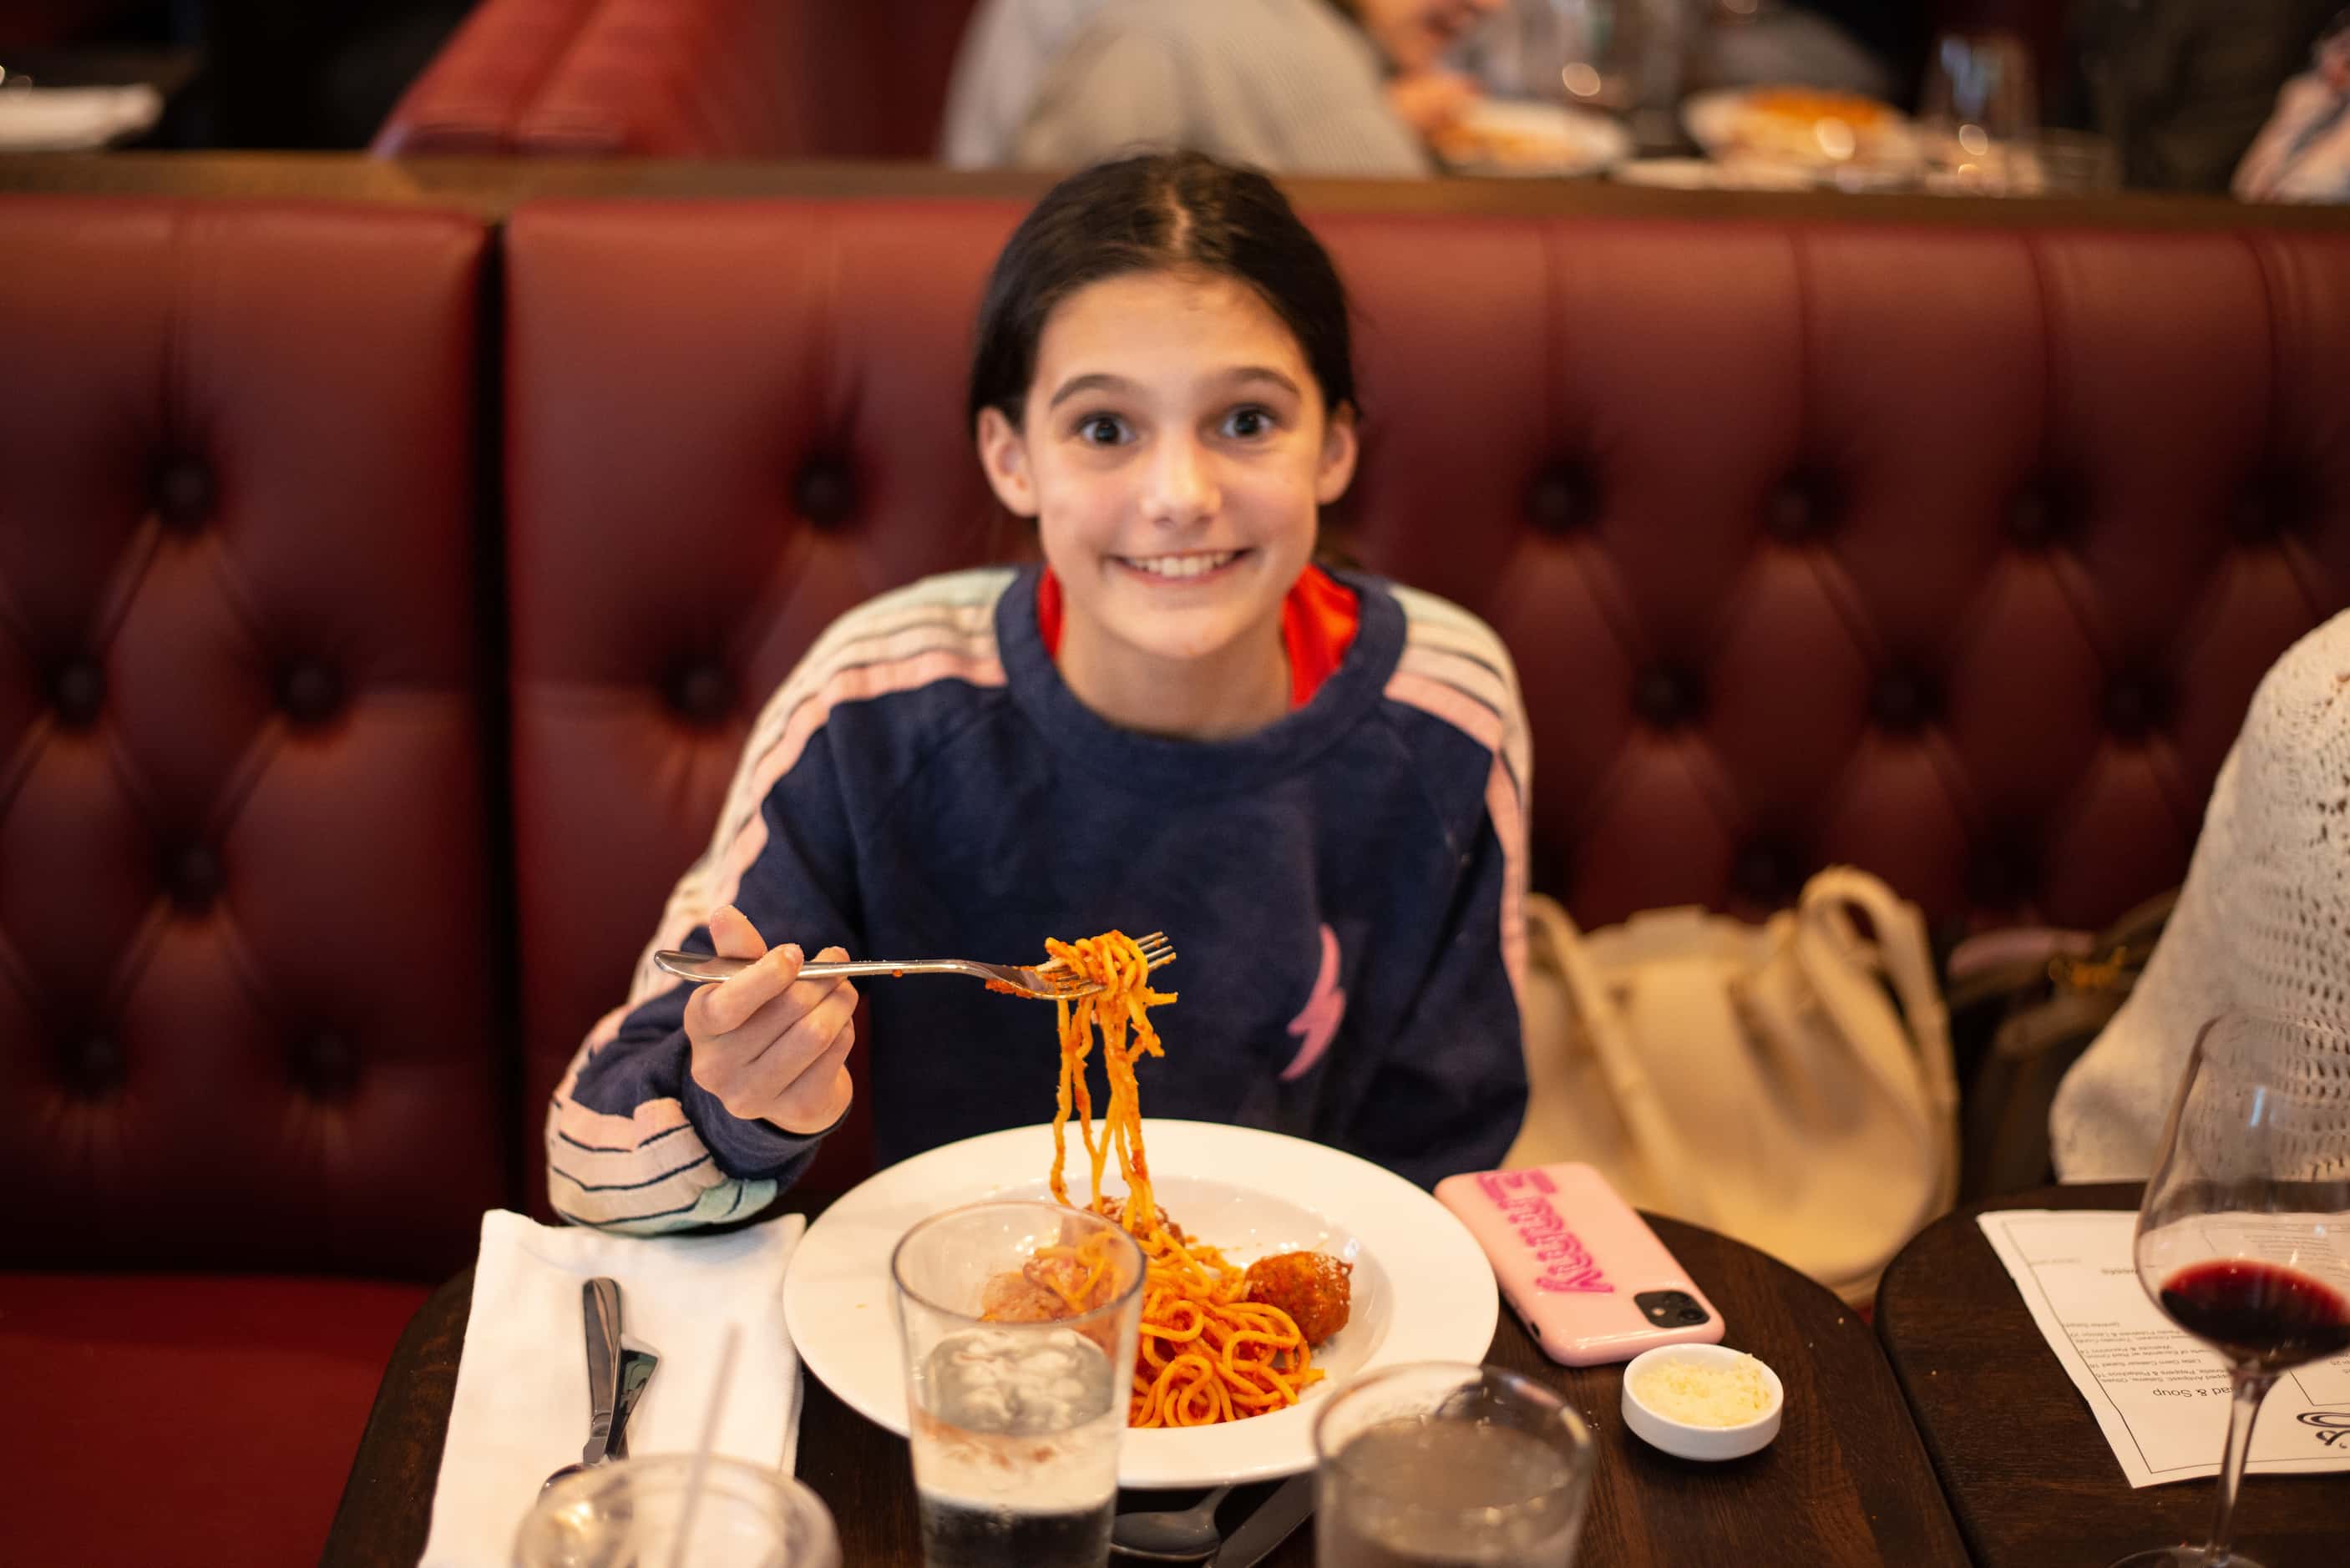 Emmy Barsotti, owner Julian Barsotti's daughter, grew up eating at Carbone's Fine Food and...